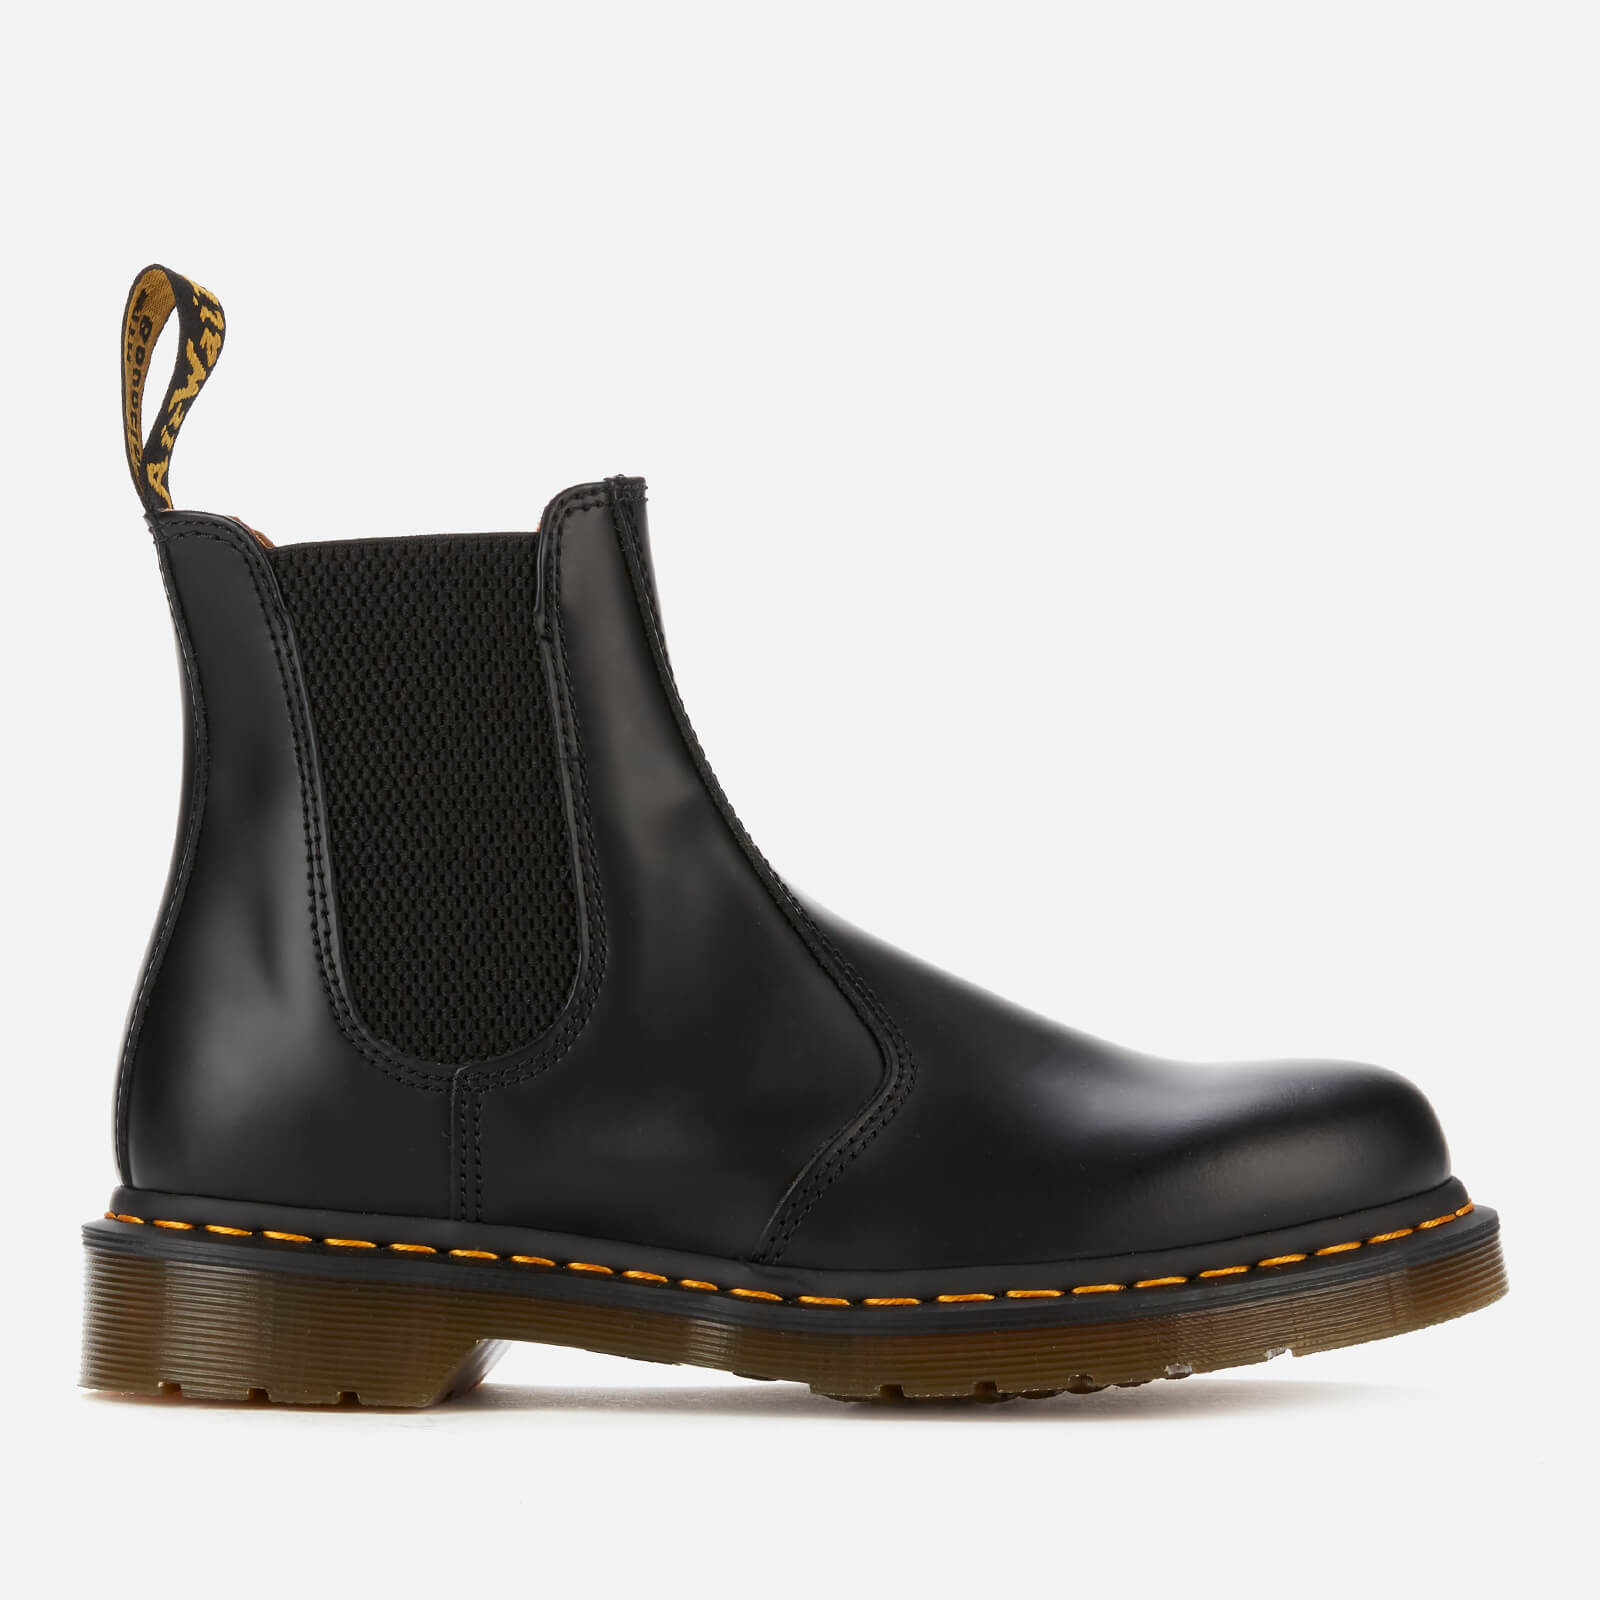 Dr. Martens 2976 Smooth Leather Chelsea Boots - Black - UK 7